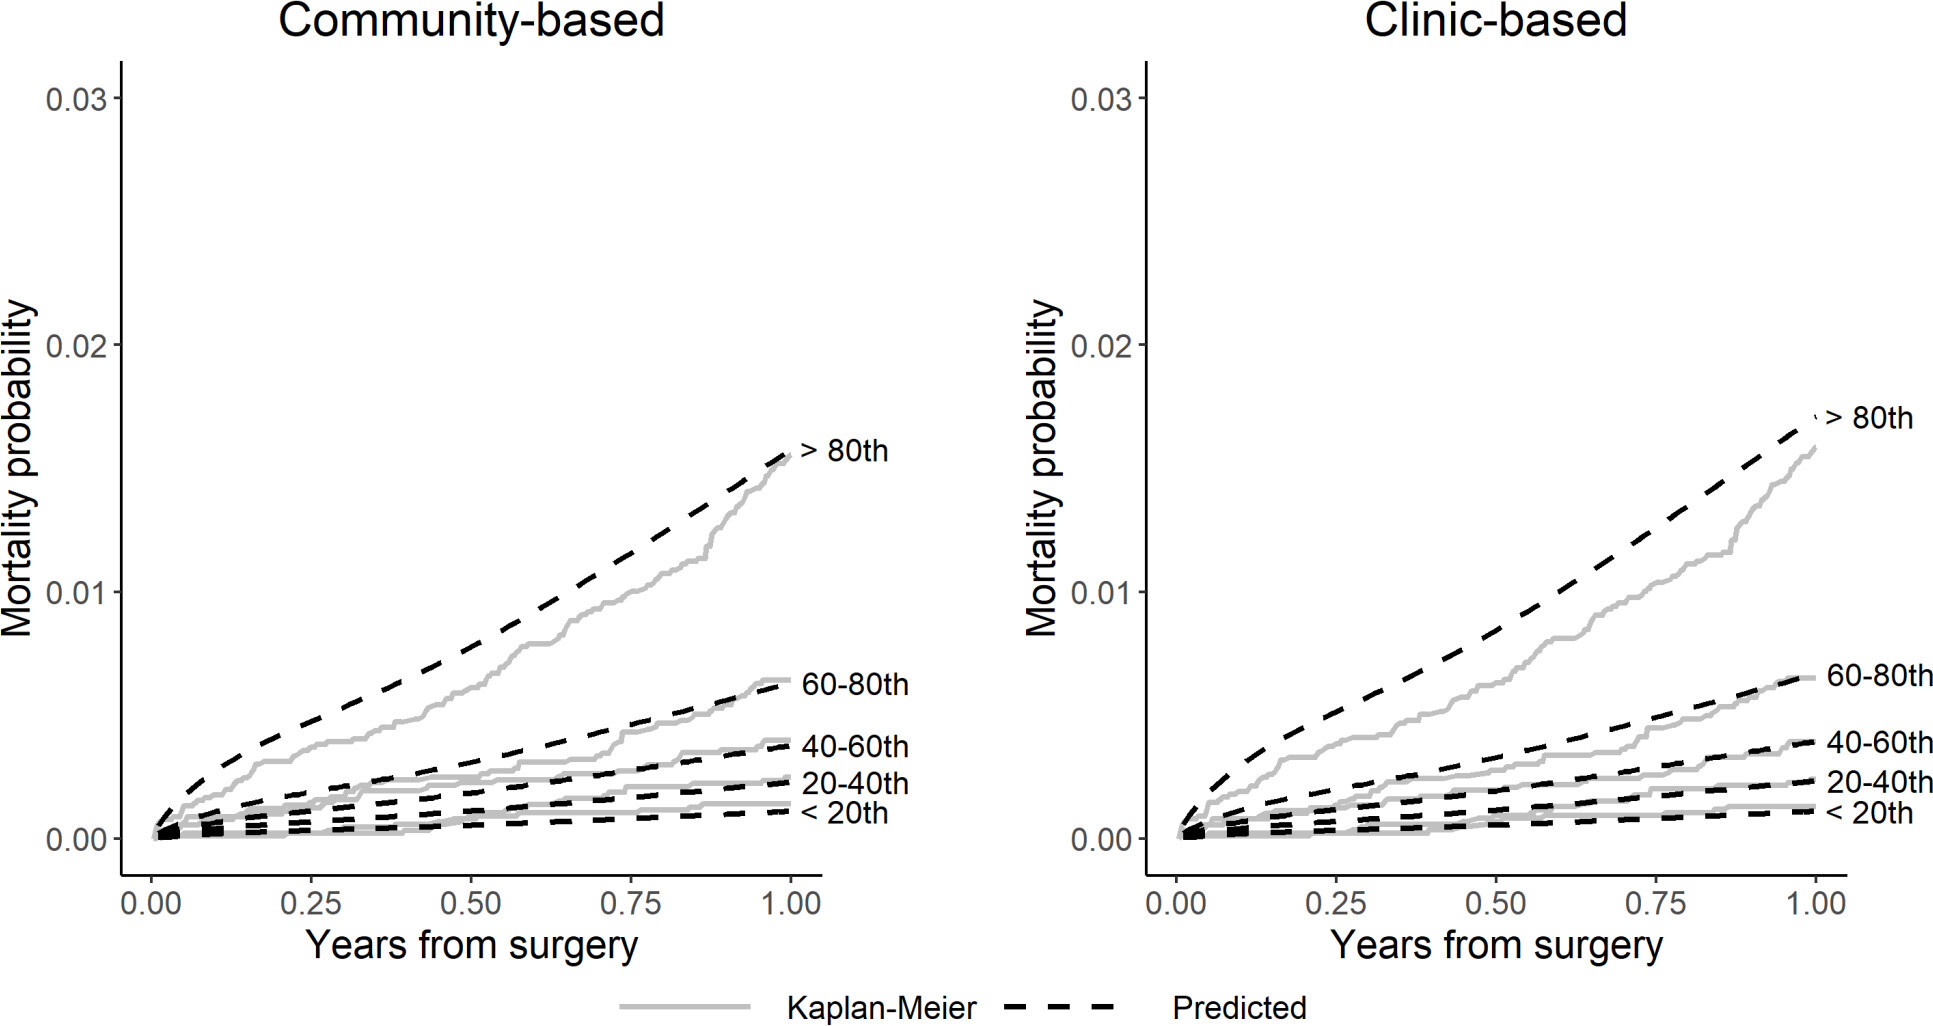 Fig. 6 
            Calibration plots comparing observed (Kaplan-Meier) versus predicted mortality by risk quintile for community-based and clinic-based knee models in the Norwegian Arthroplasty Register (NAR) external validation.
          